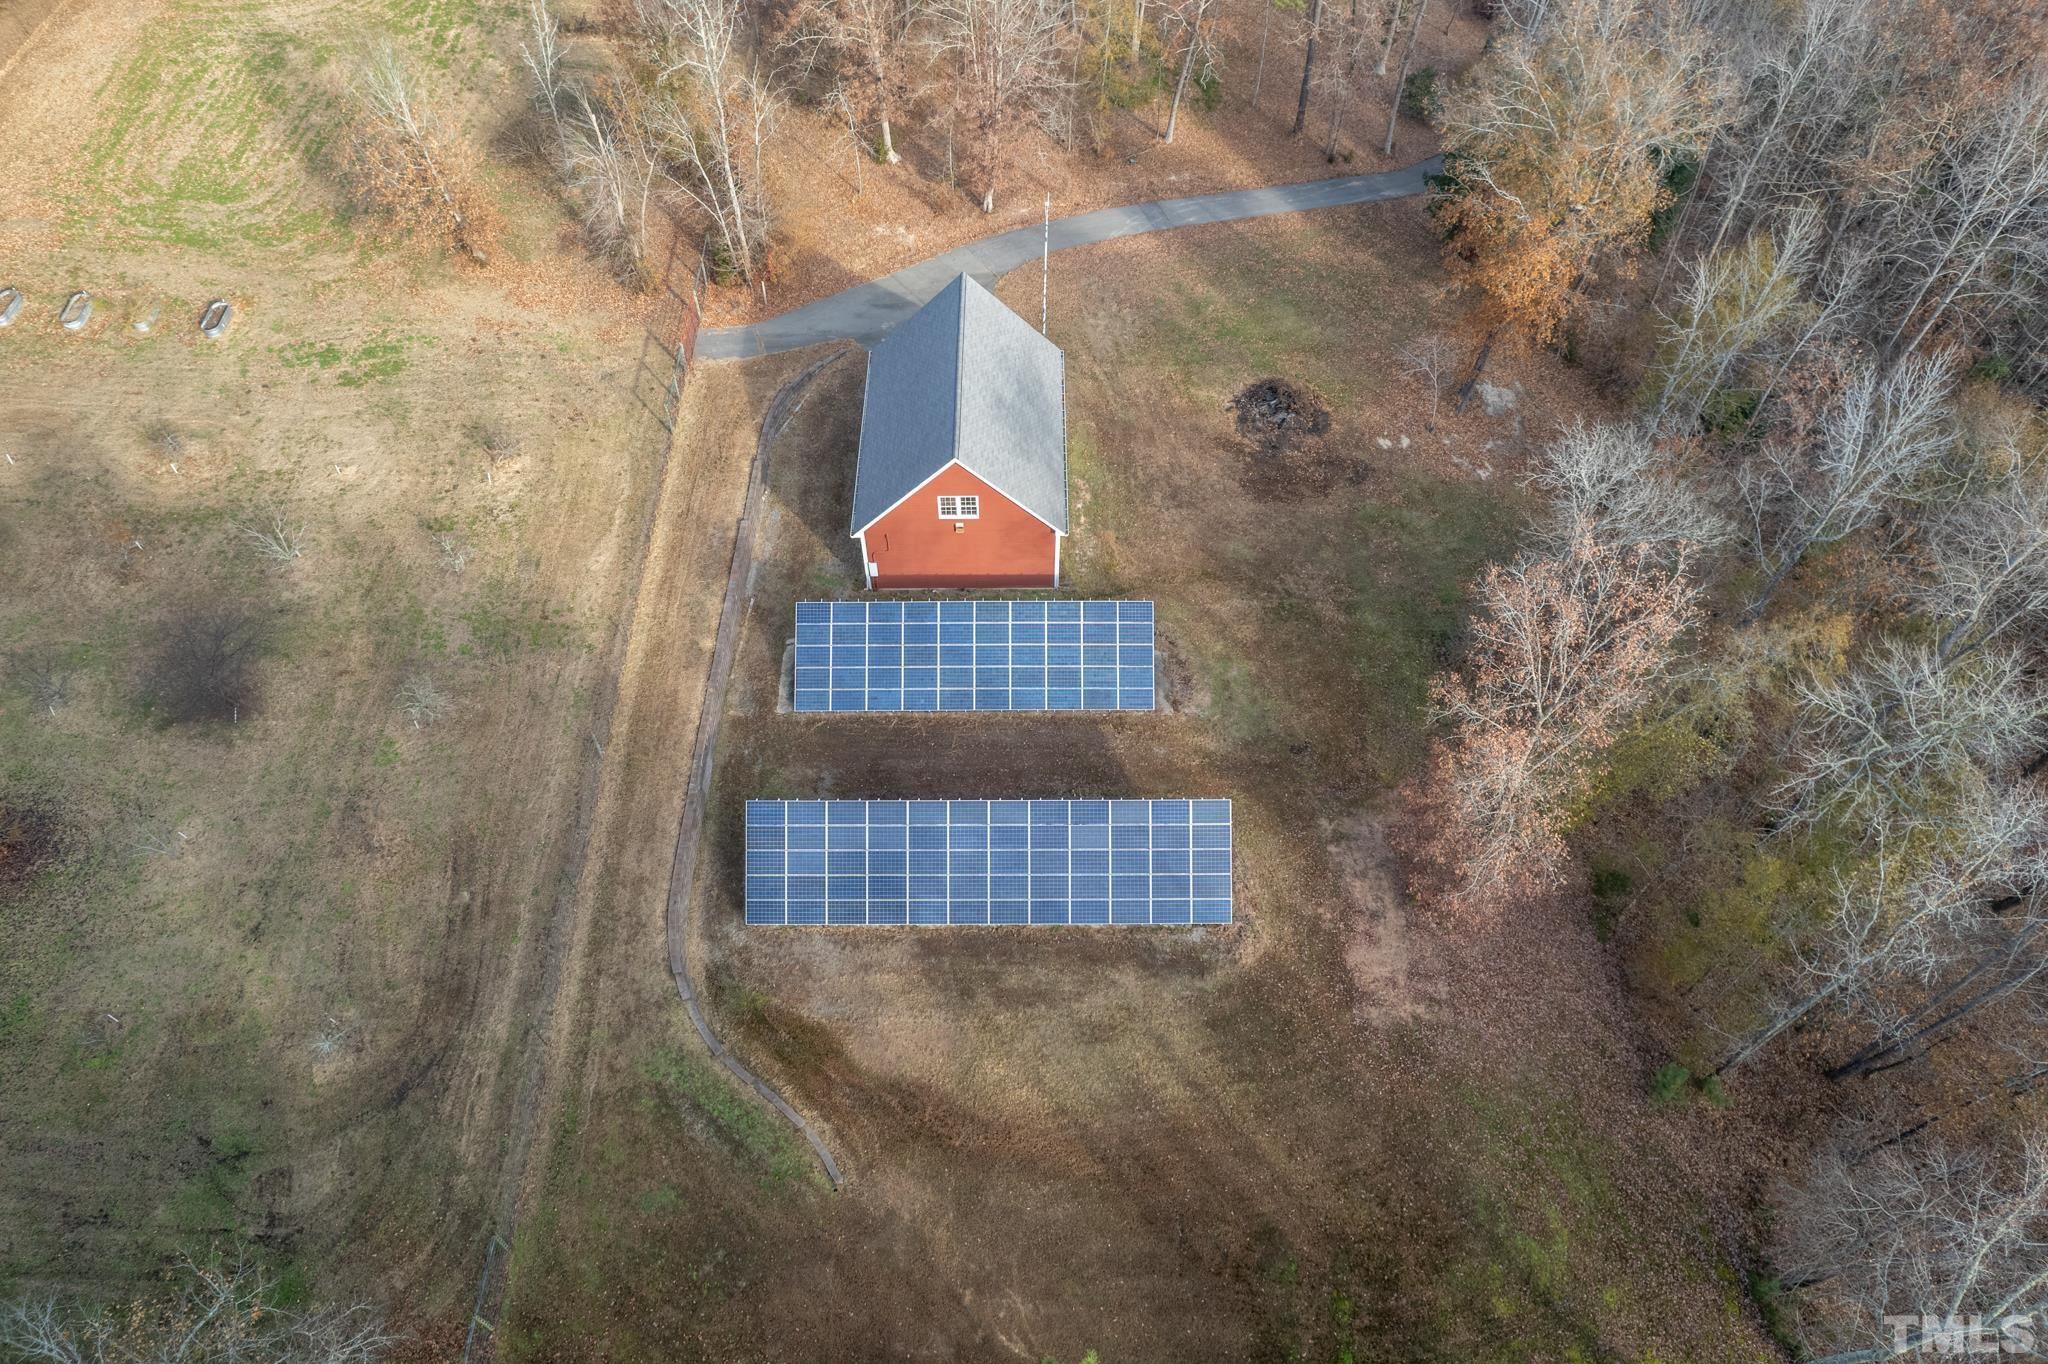 Solar panels can power the entire property. Two story barn waiting to be made into whatever you want!